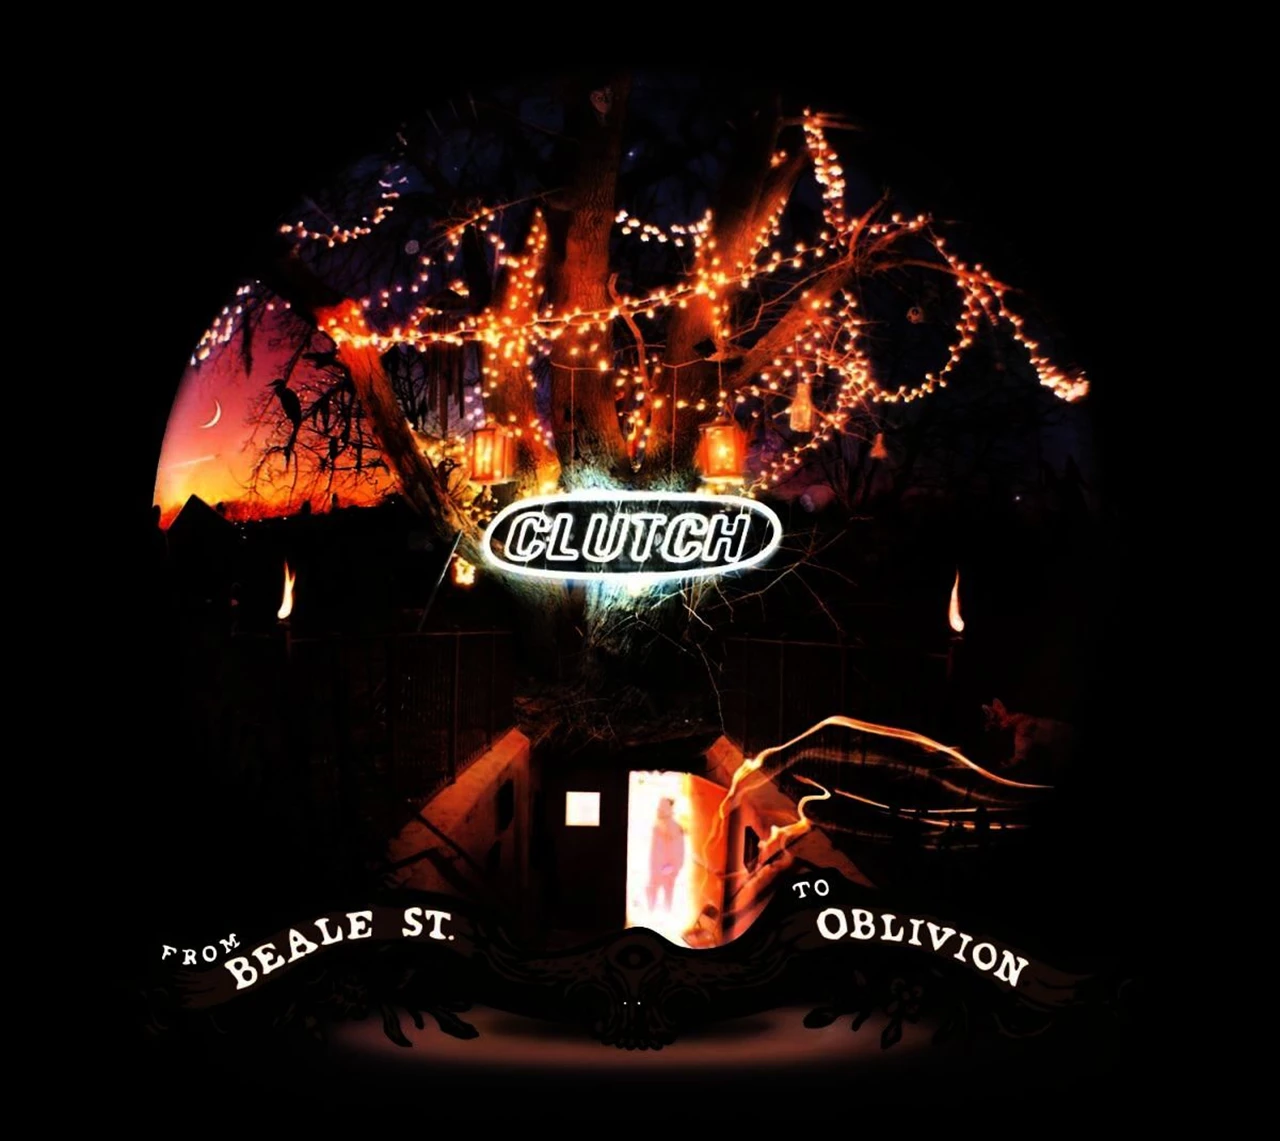 From Beale Street To Oblivion by Clutch